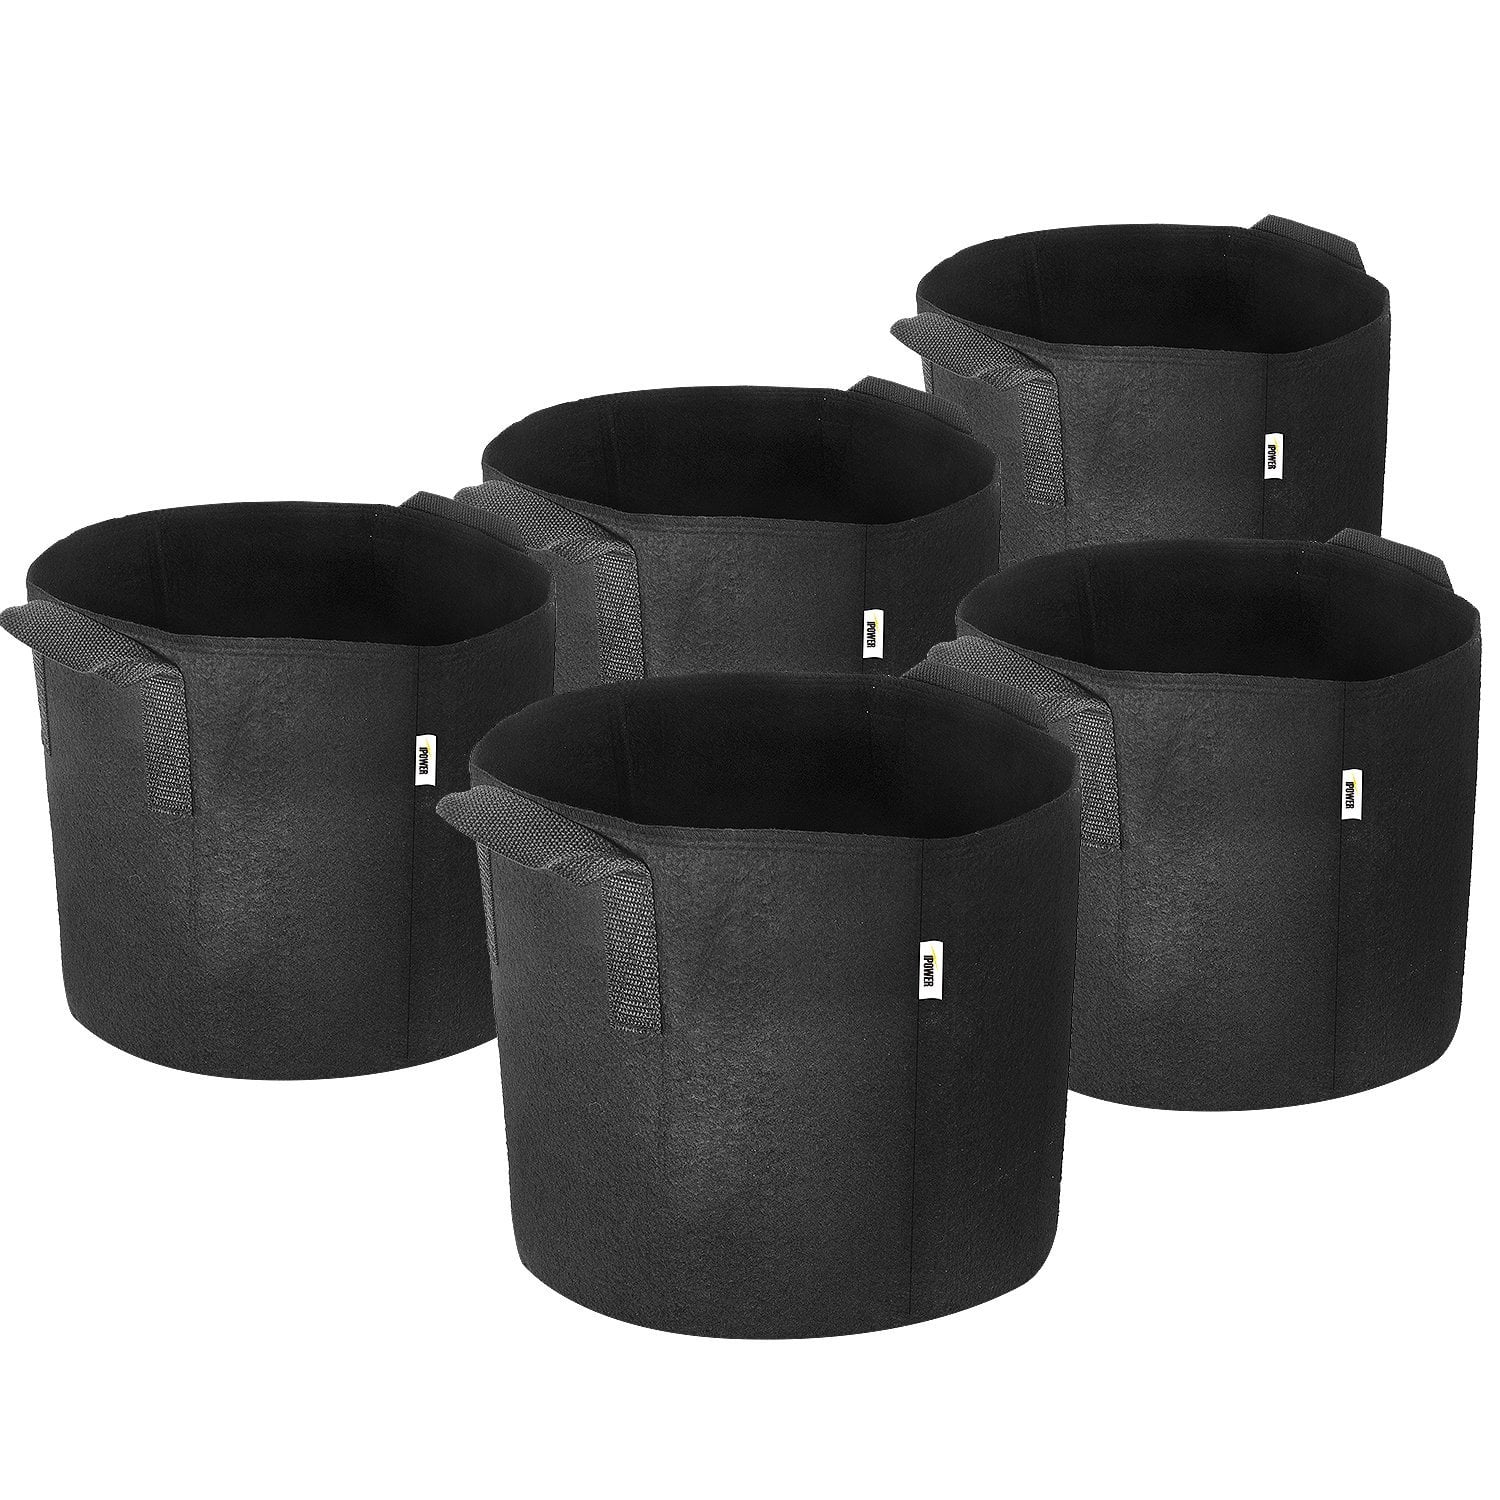 10x Round Fabric Pots Plant Pouch Root Container Grow Bag Aeration 3 Gallon KS 